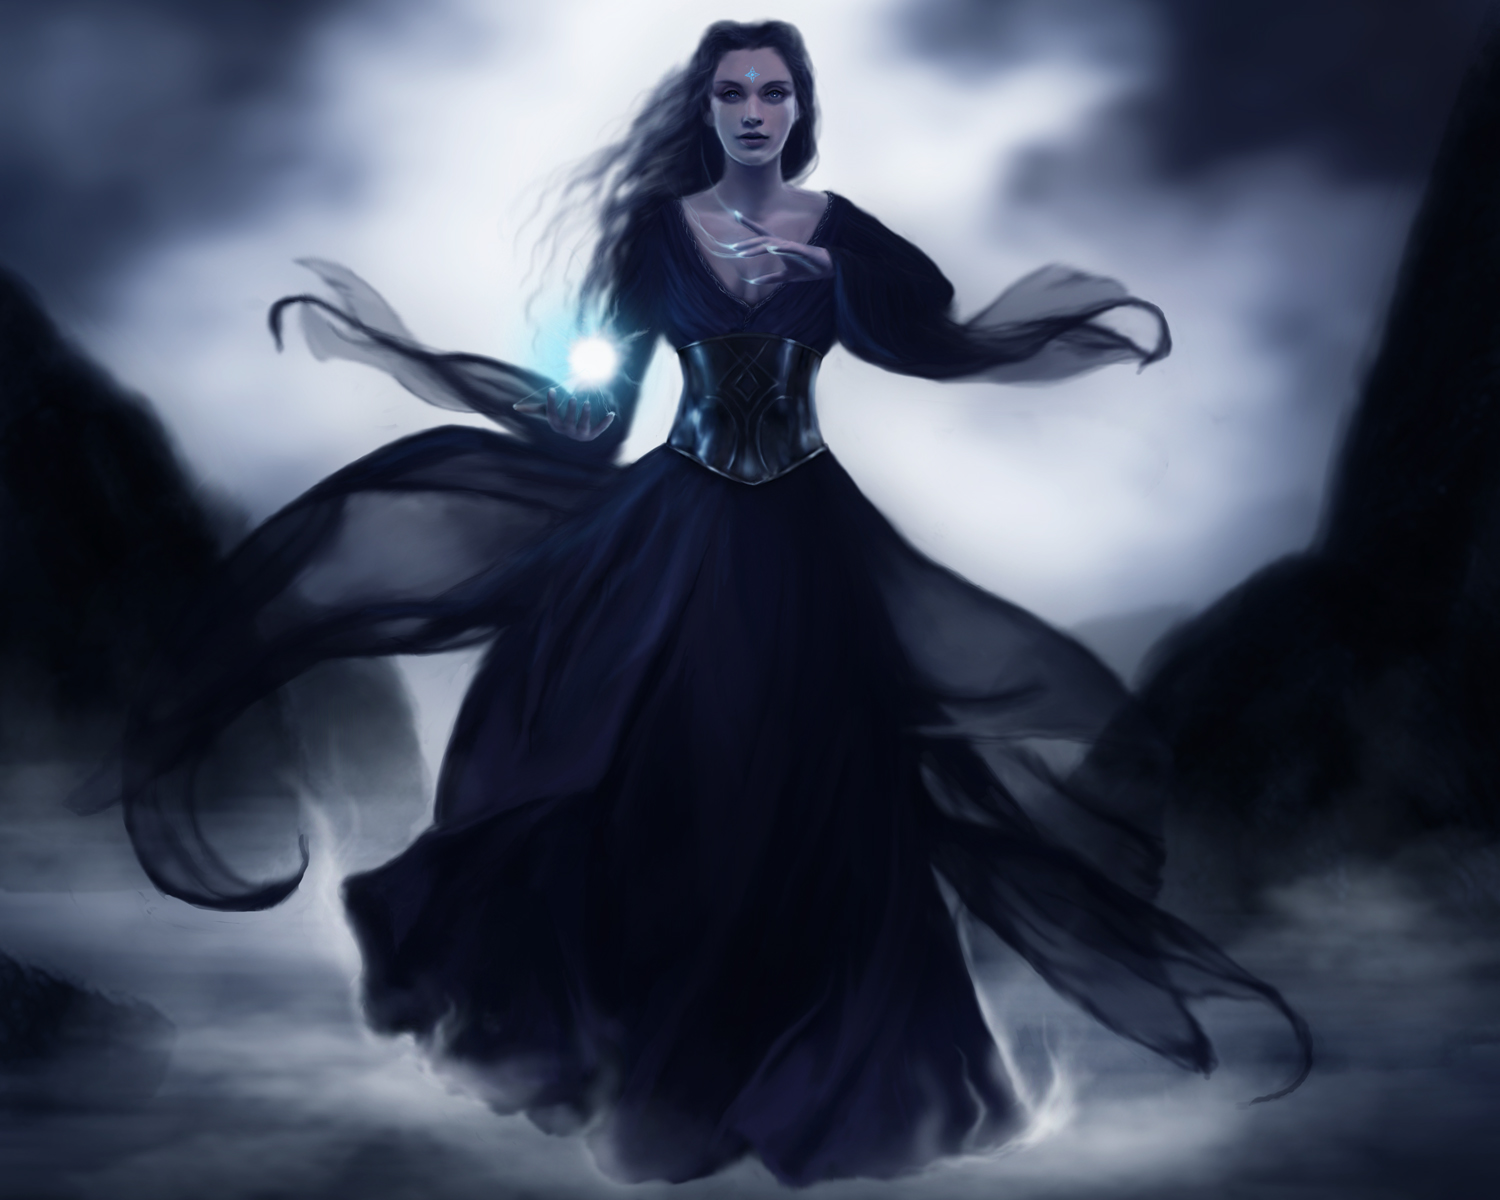 Horror Gothic Fantasy Art Witch Magic Women Girl Gown Occult Wallpaper